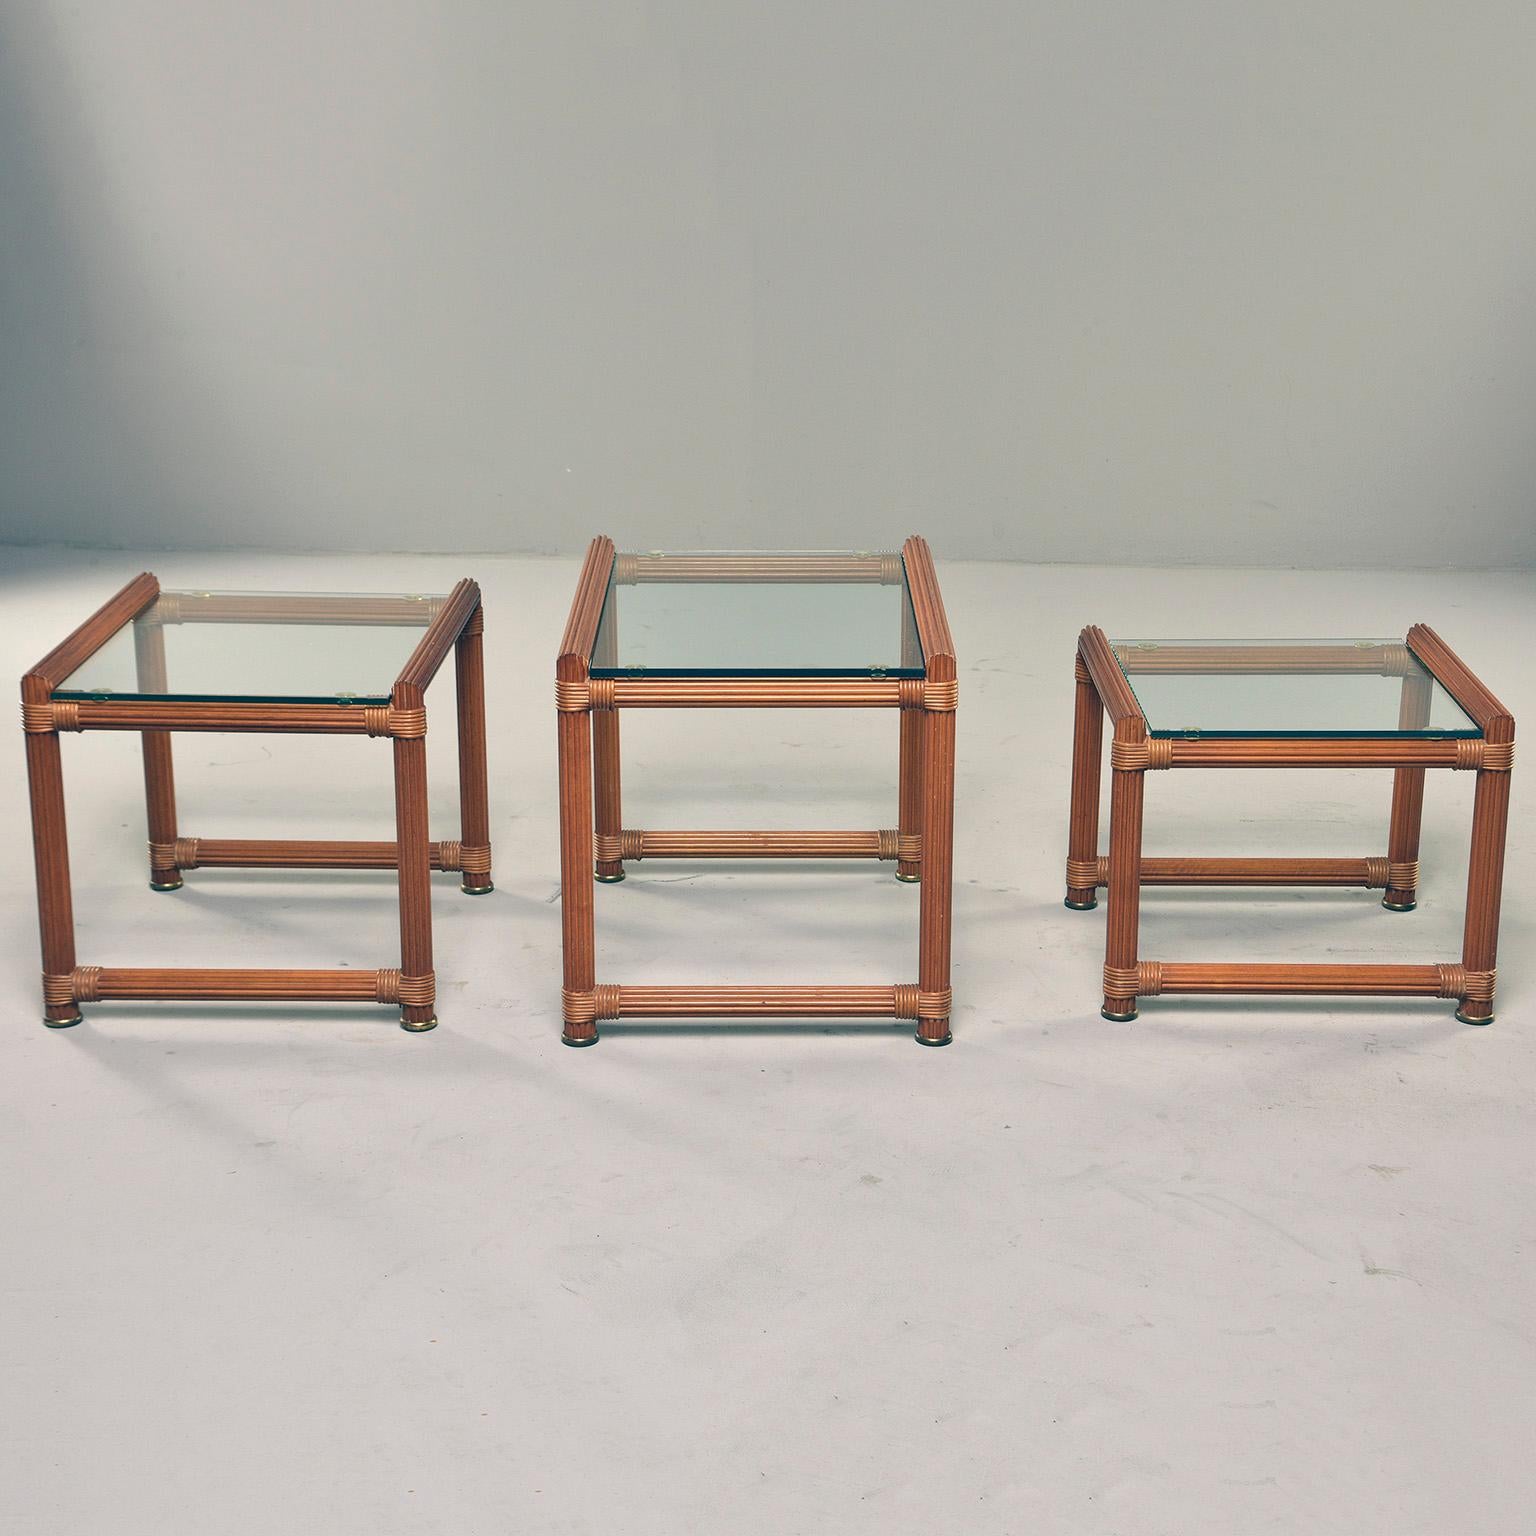 Trio of nesting tables feature reeded wood frames with brass rimmed feet and glass tops, circa 1970s. Found in Italy. Unknown maker. Sold and priced as a set of three. Measurements of three tables are as follows:

Large 17.5” H x 23” W x 17”